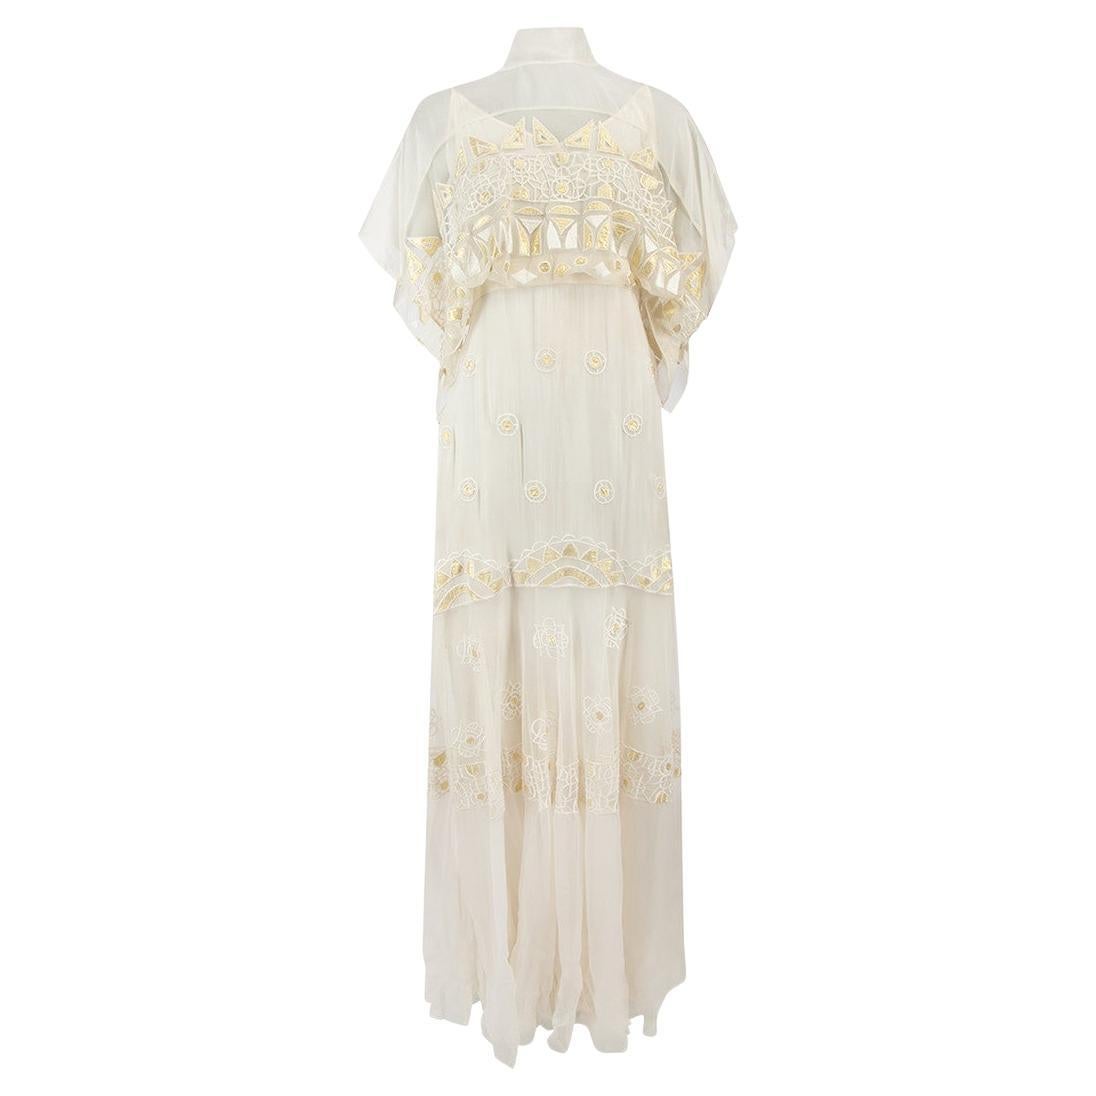 Pre-Loved Temperley London Women's Cream Sheer Panel Embroidered Maxi Dress